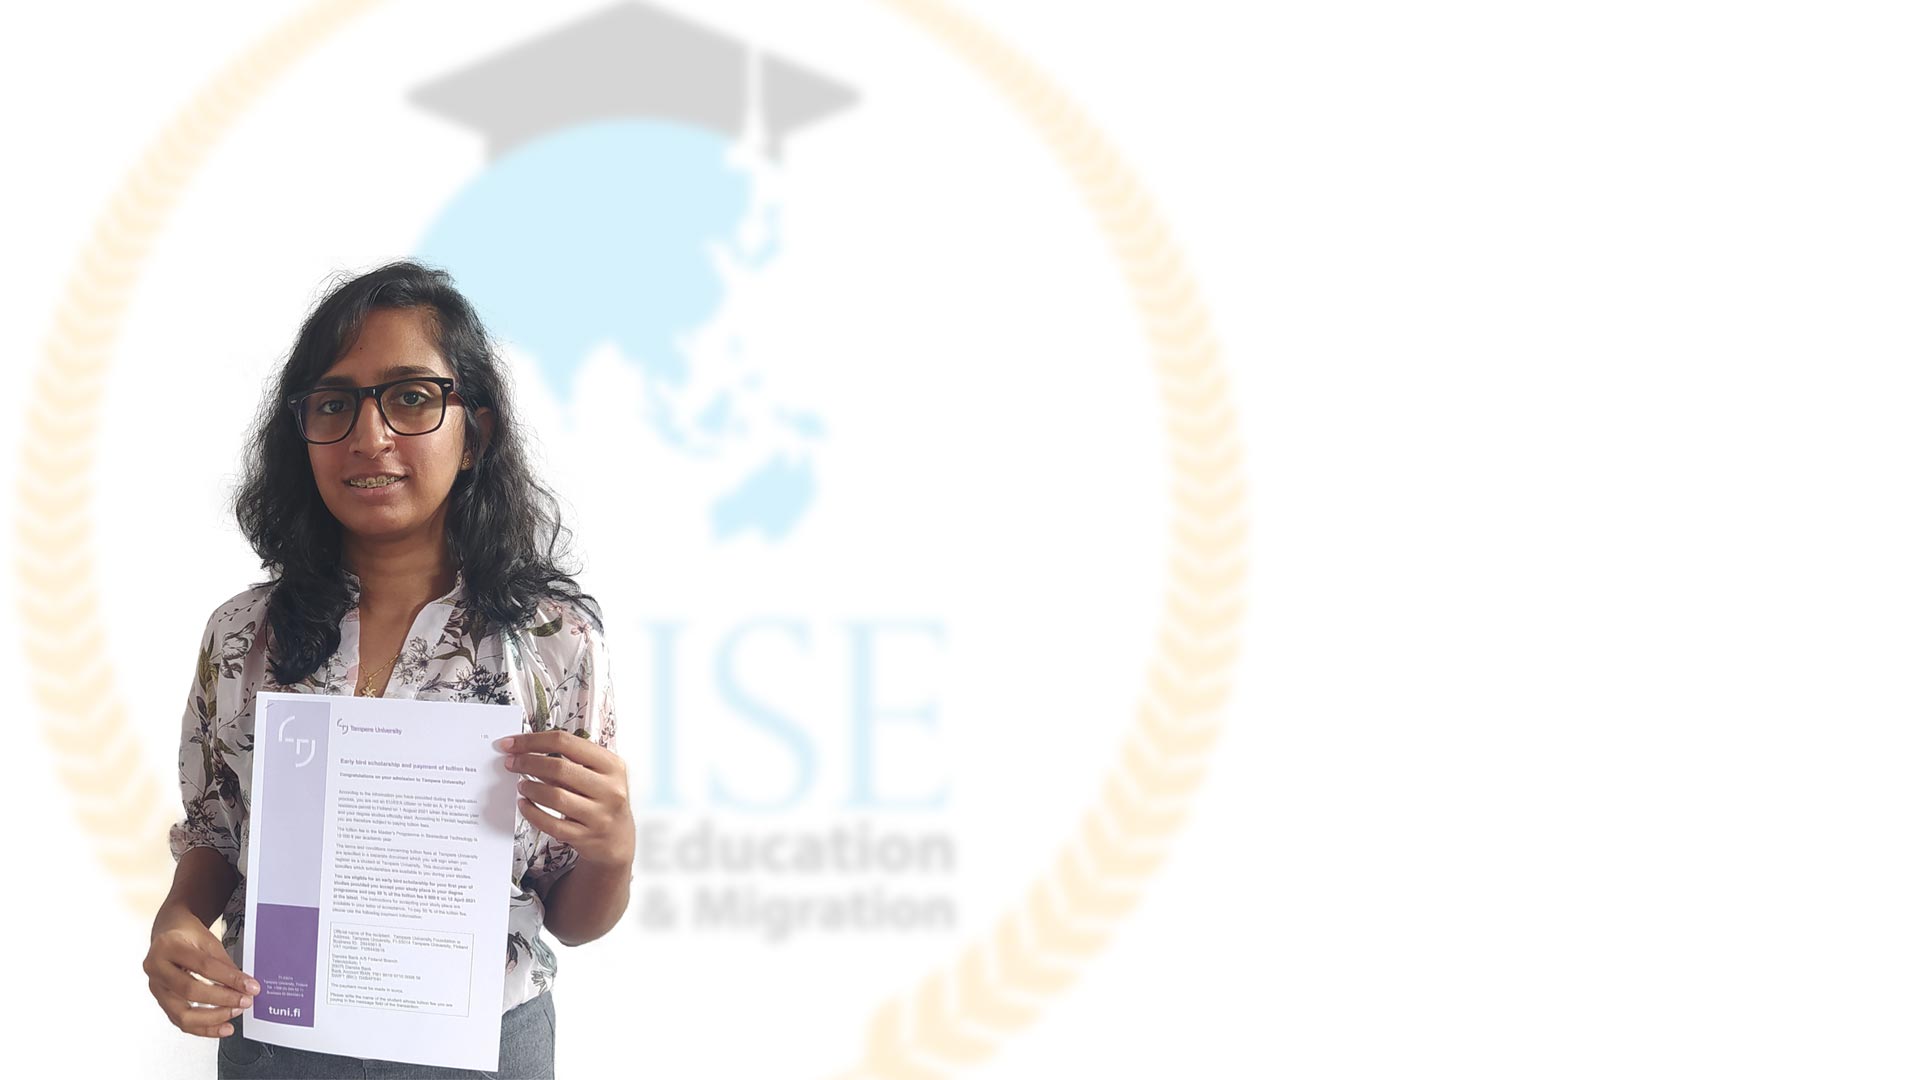 Harini receiving her resident visa from Wise Education